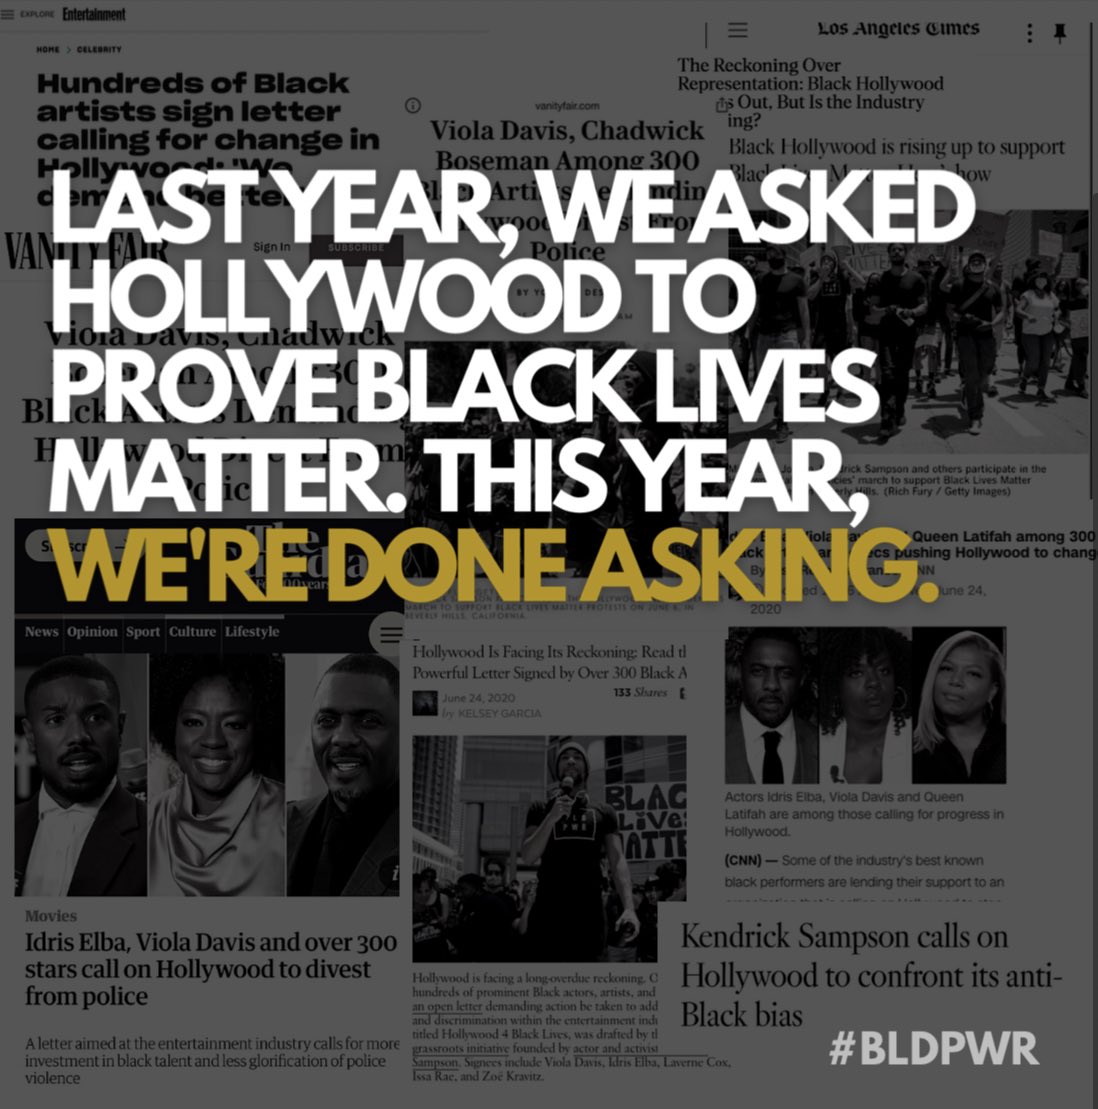 It’s been 1 year since @WeBldPwr launched #Hollywood4BlackLives, with a letter demanding Hollywood divest from racism within the industry & invest in inclusivity & safety. Hollywood needs to do better. And we’re done asking politely. Learn more at bit.ly/3gQQNZG